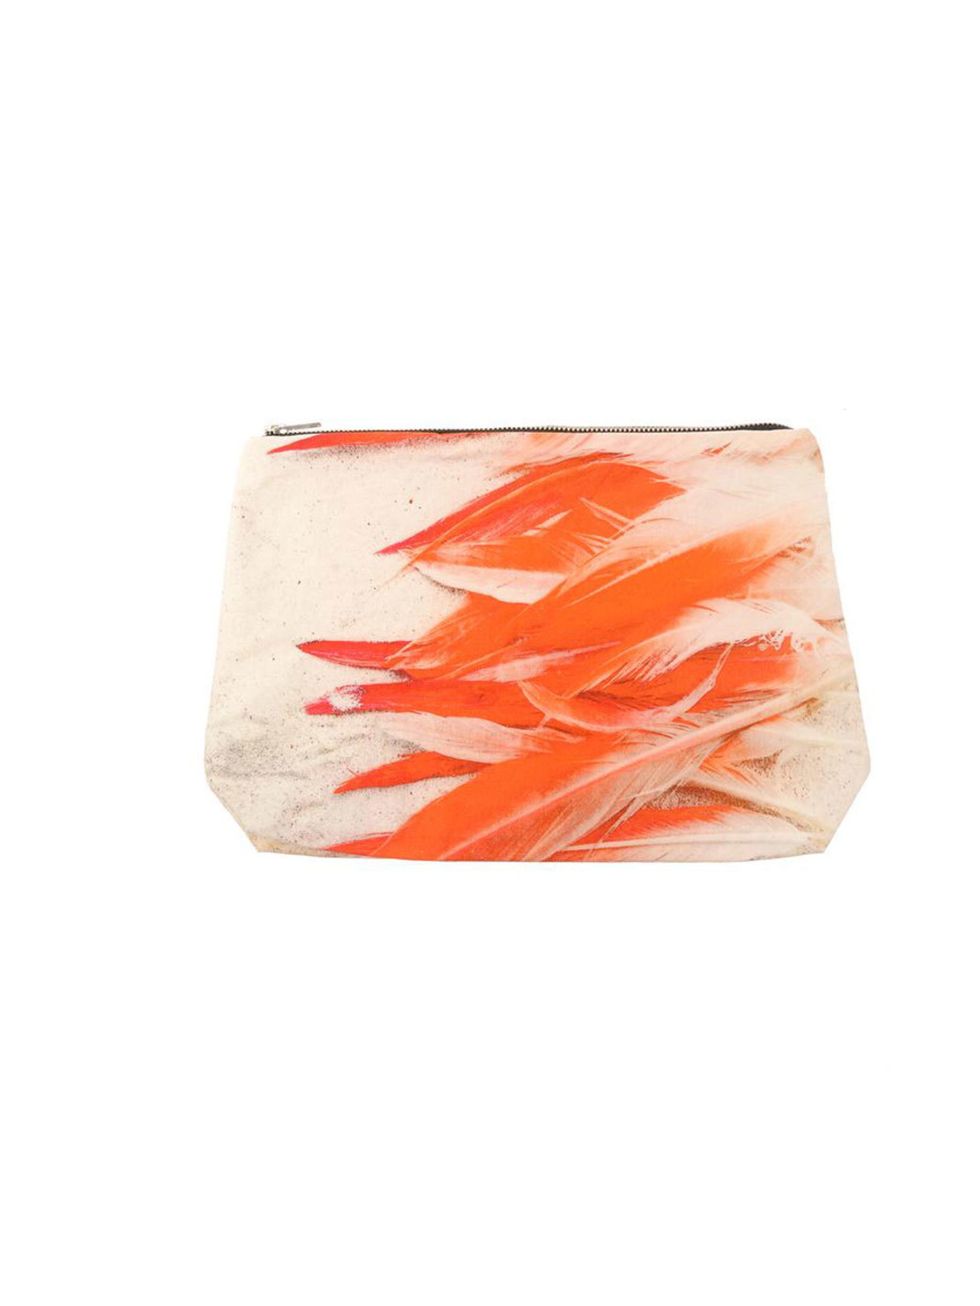 <p>Samudra feather print cotto clutch, £60, at Browns</p><p><a href="http://shopping.elleuk.com/browse?fts=samudra+flamingo+clutch">BUY NOW</a></p>